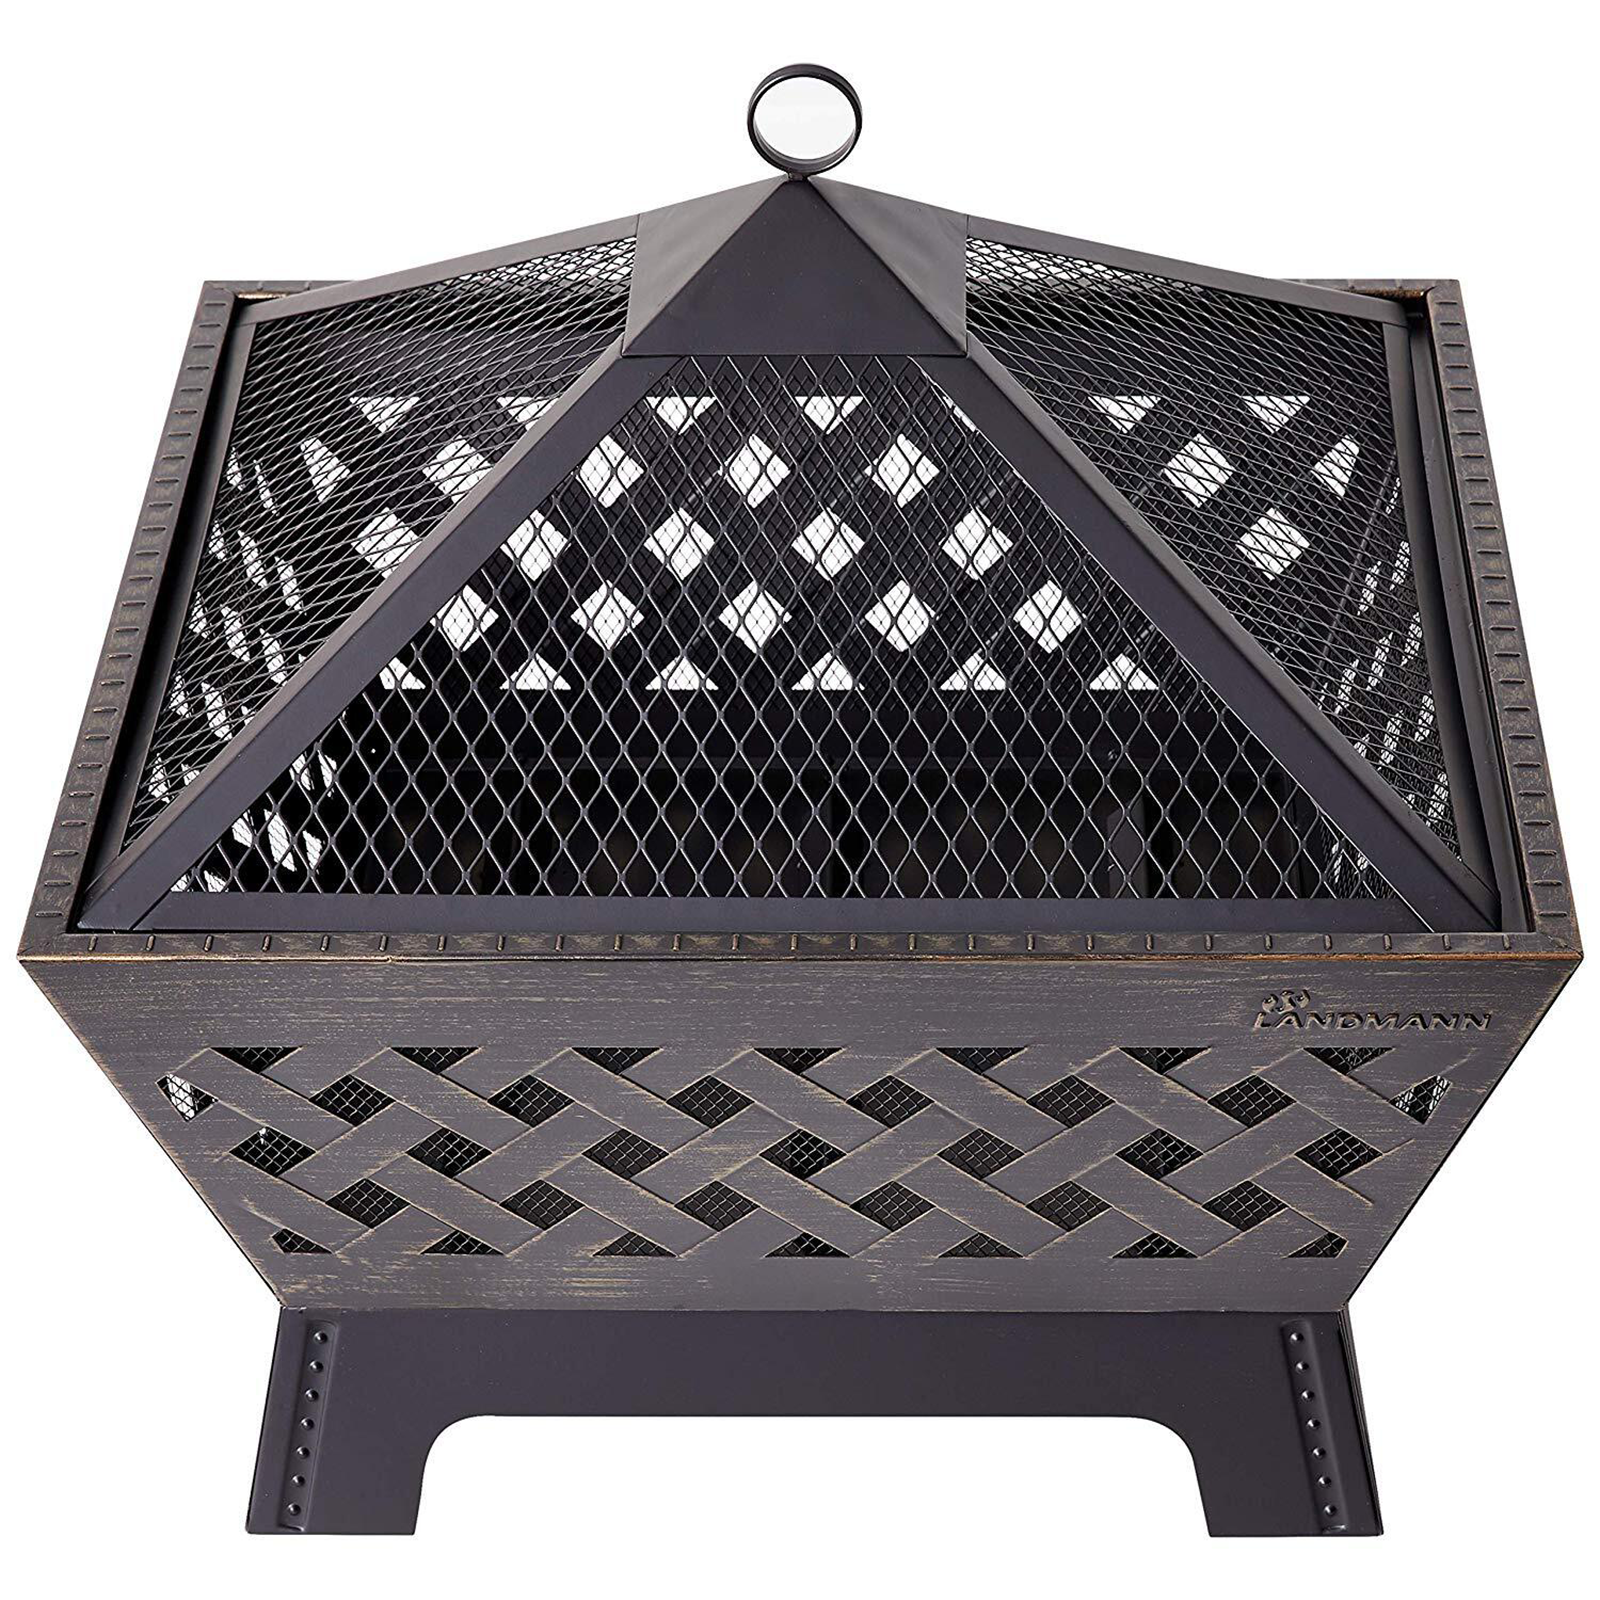 New Landmann Square Fire Pit with Cover & Poker - 22103 | eBay